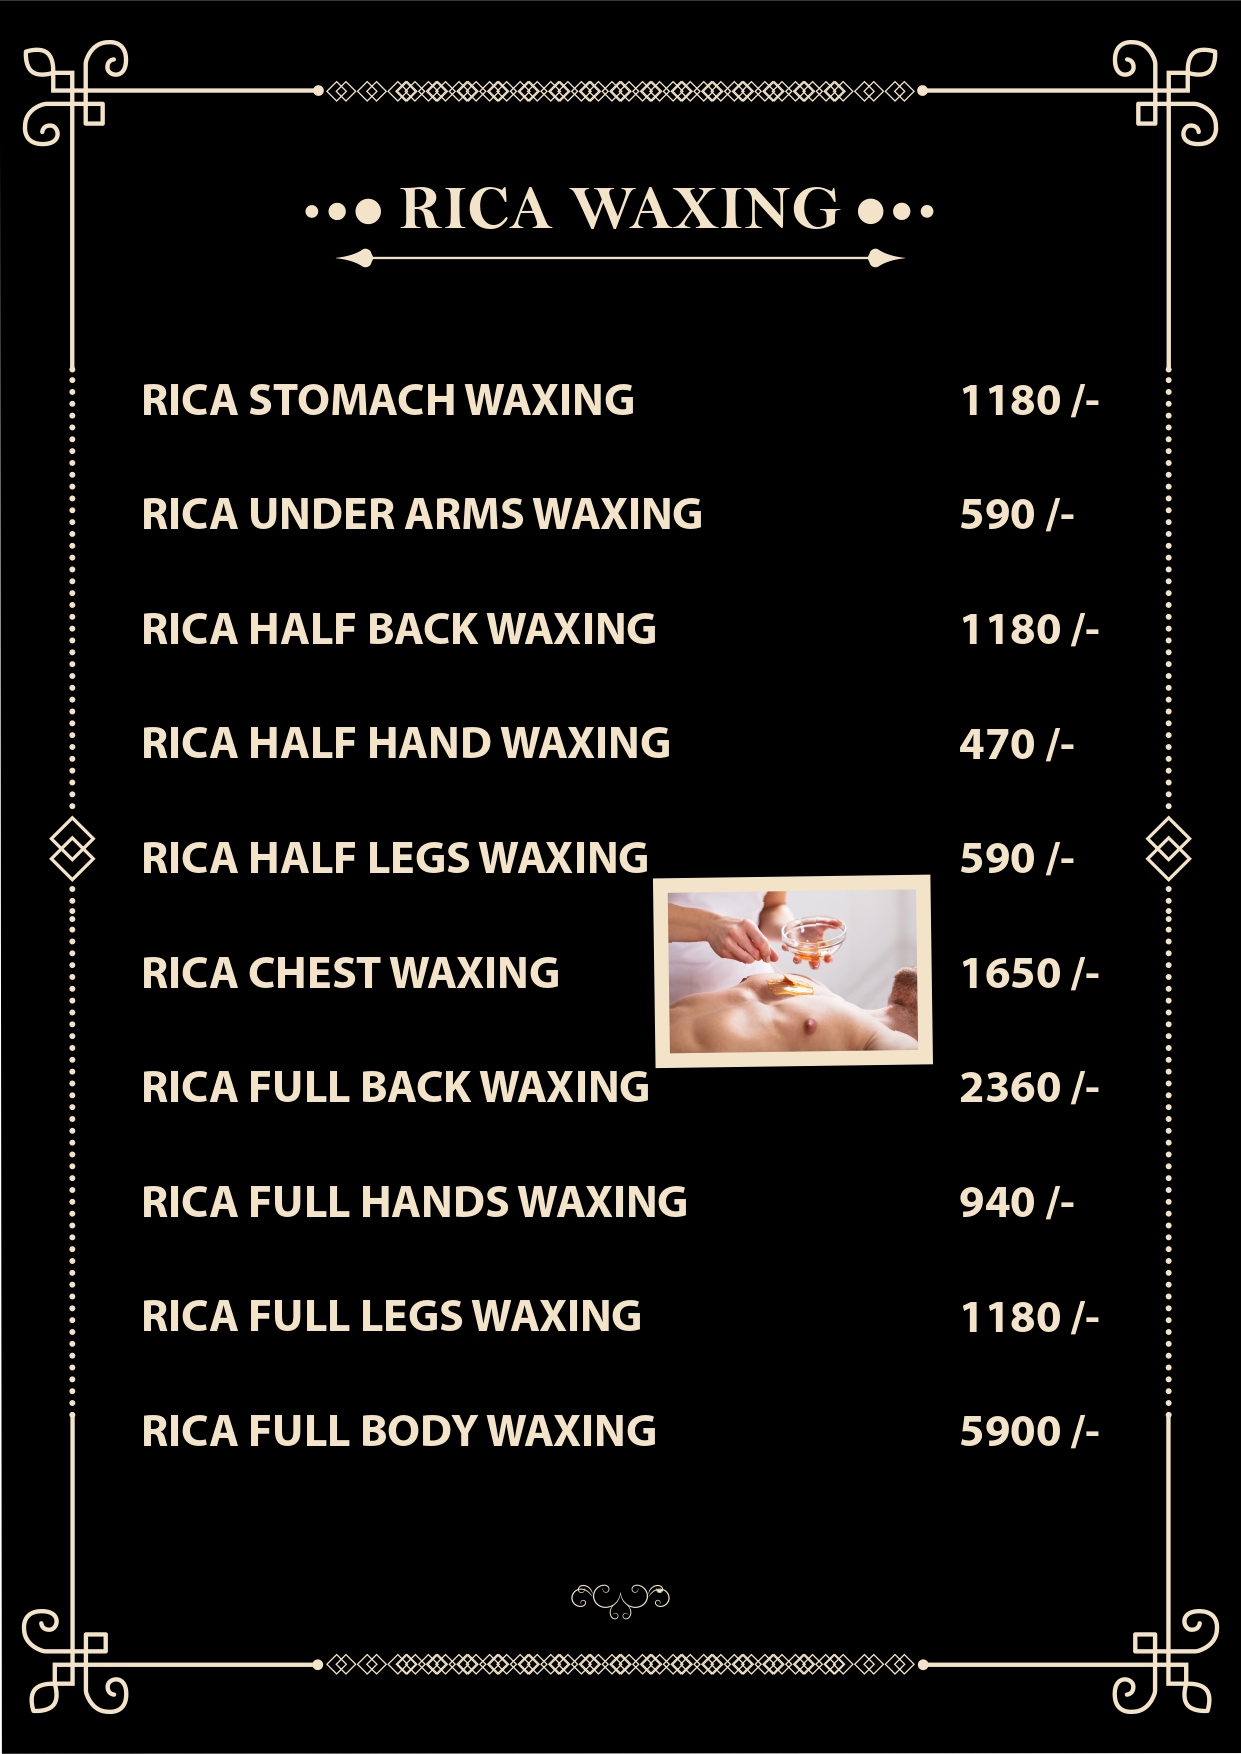 Premium Waxing Services in Bangalore at Best Price | Bodycraft